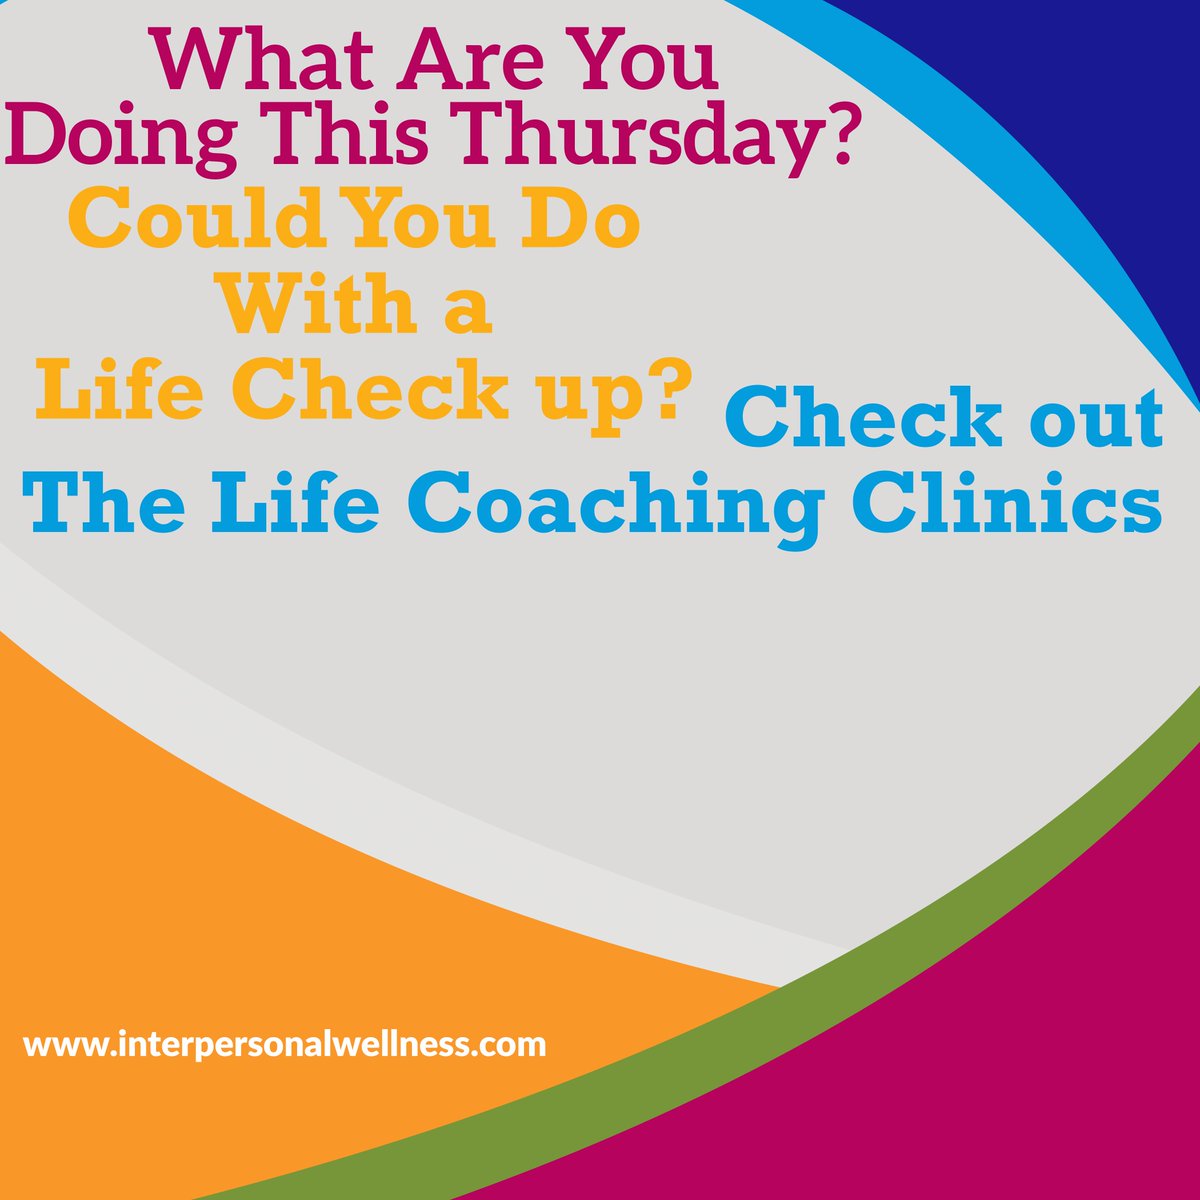 Ready to make life changes to get you ready for 2020? Register for a Thursday evening life coaching clinic. Take the first step for the life you want to have: ed.gr/bzedp
#emotionalpain #healing #emotionawellness #emotionaldistress #emotionalhealing #wellness